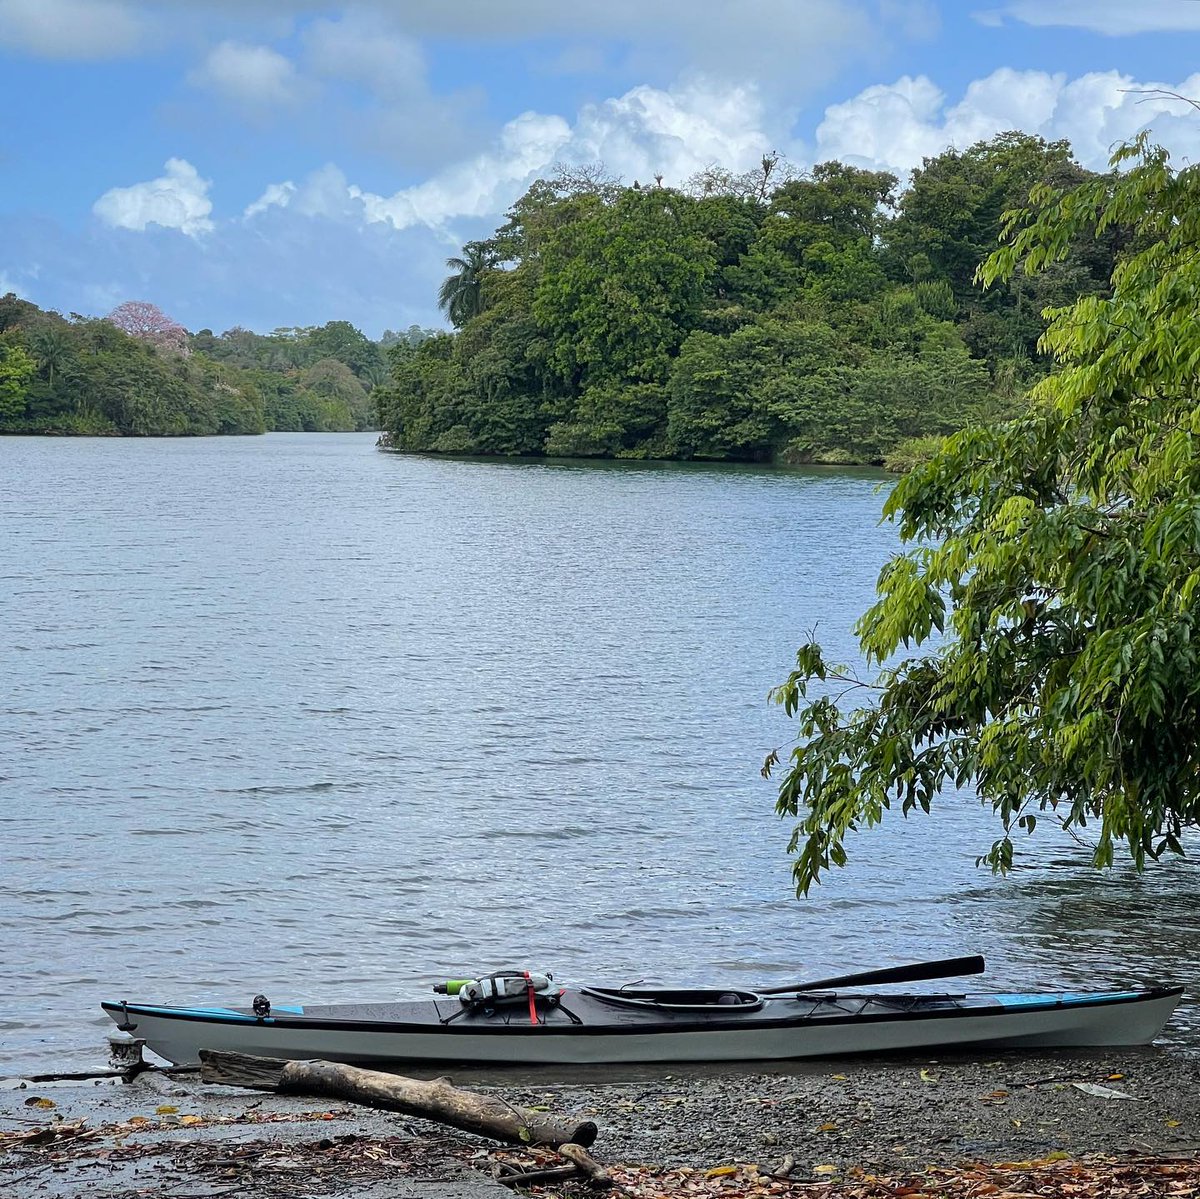 TRAK in the wild! 

This TRAK has made its way to Panama, kayaking through the Chagres River!

Live your Life Unleashed. Order your kayak now in time for your next adventure in 2023! 

ow.ly/JPUG50ICrn7

#TRAK #TRAKKayaks #LiveAdventurously #SeaKayaking #KayakingAdventure